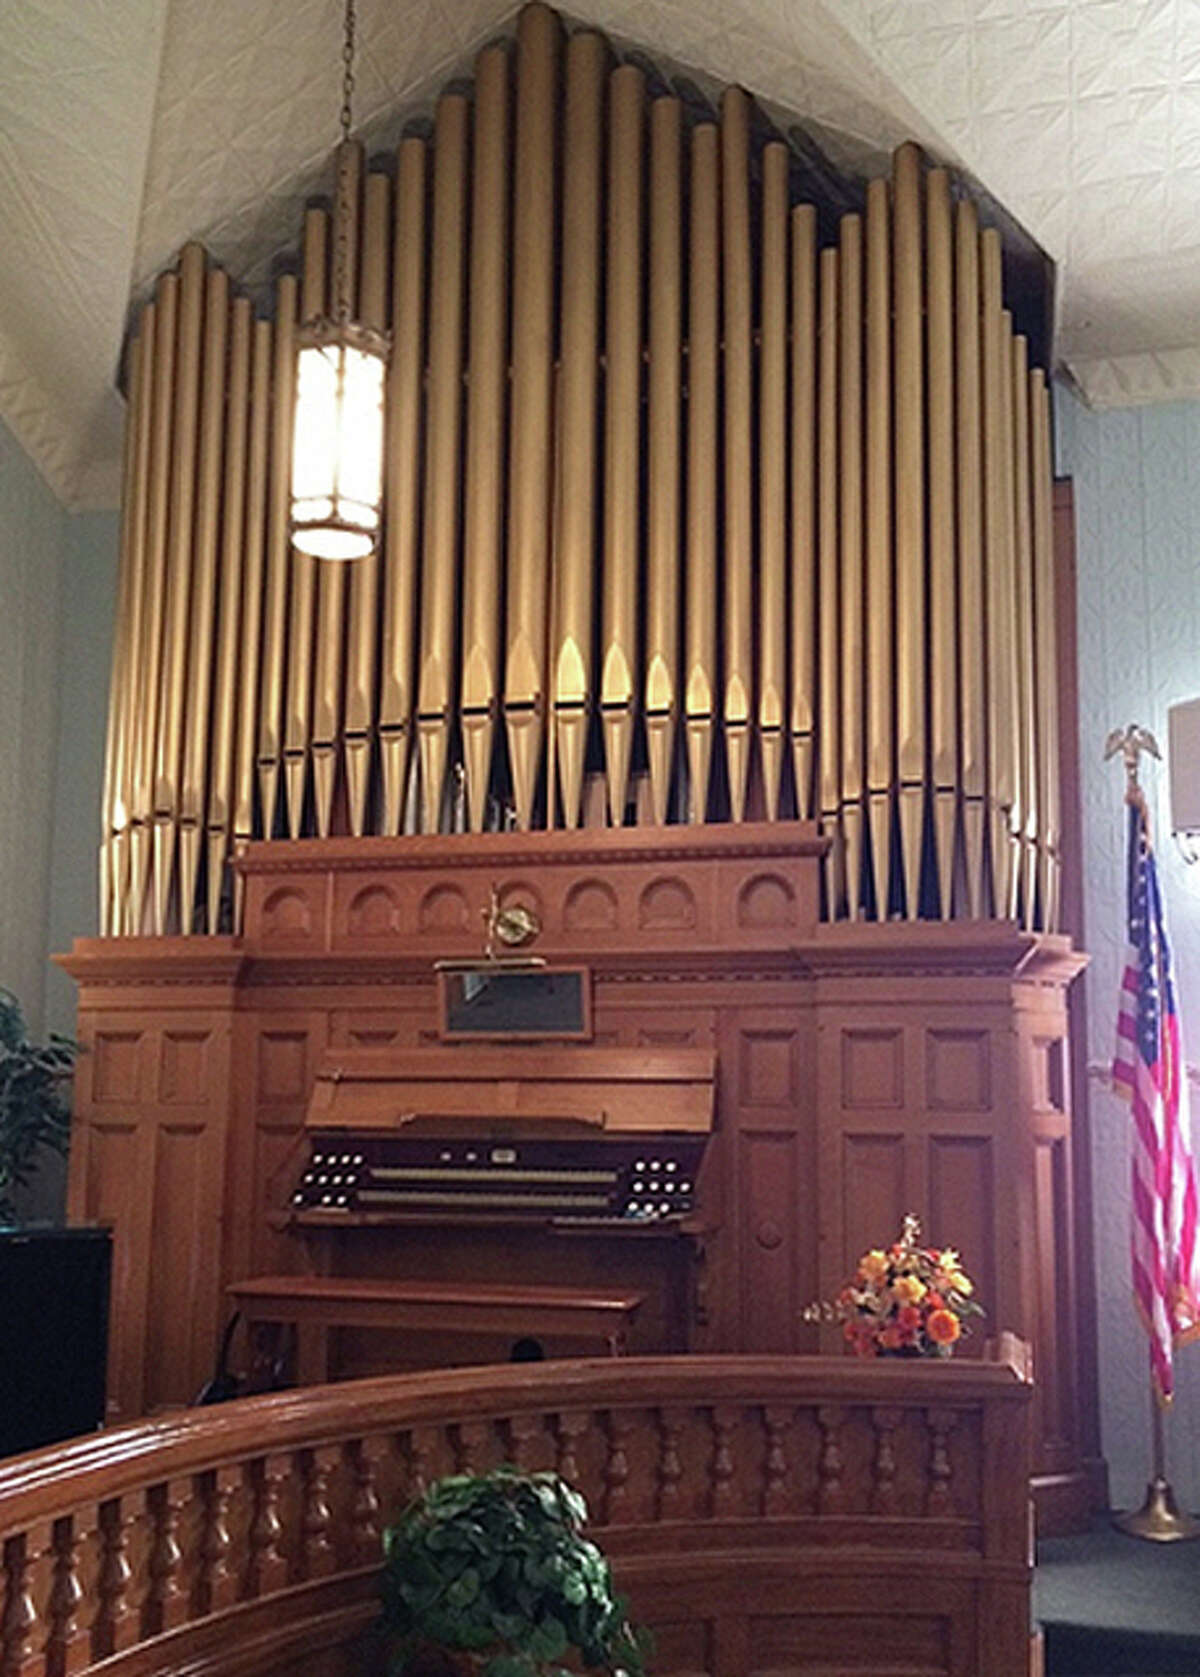 The Kilgen pipe organ at First Baptist Church of Roodhouse is turning 100 years old in December.